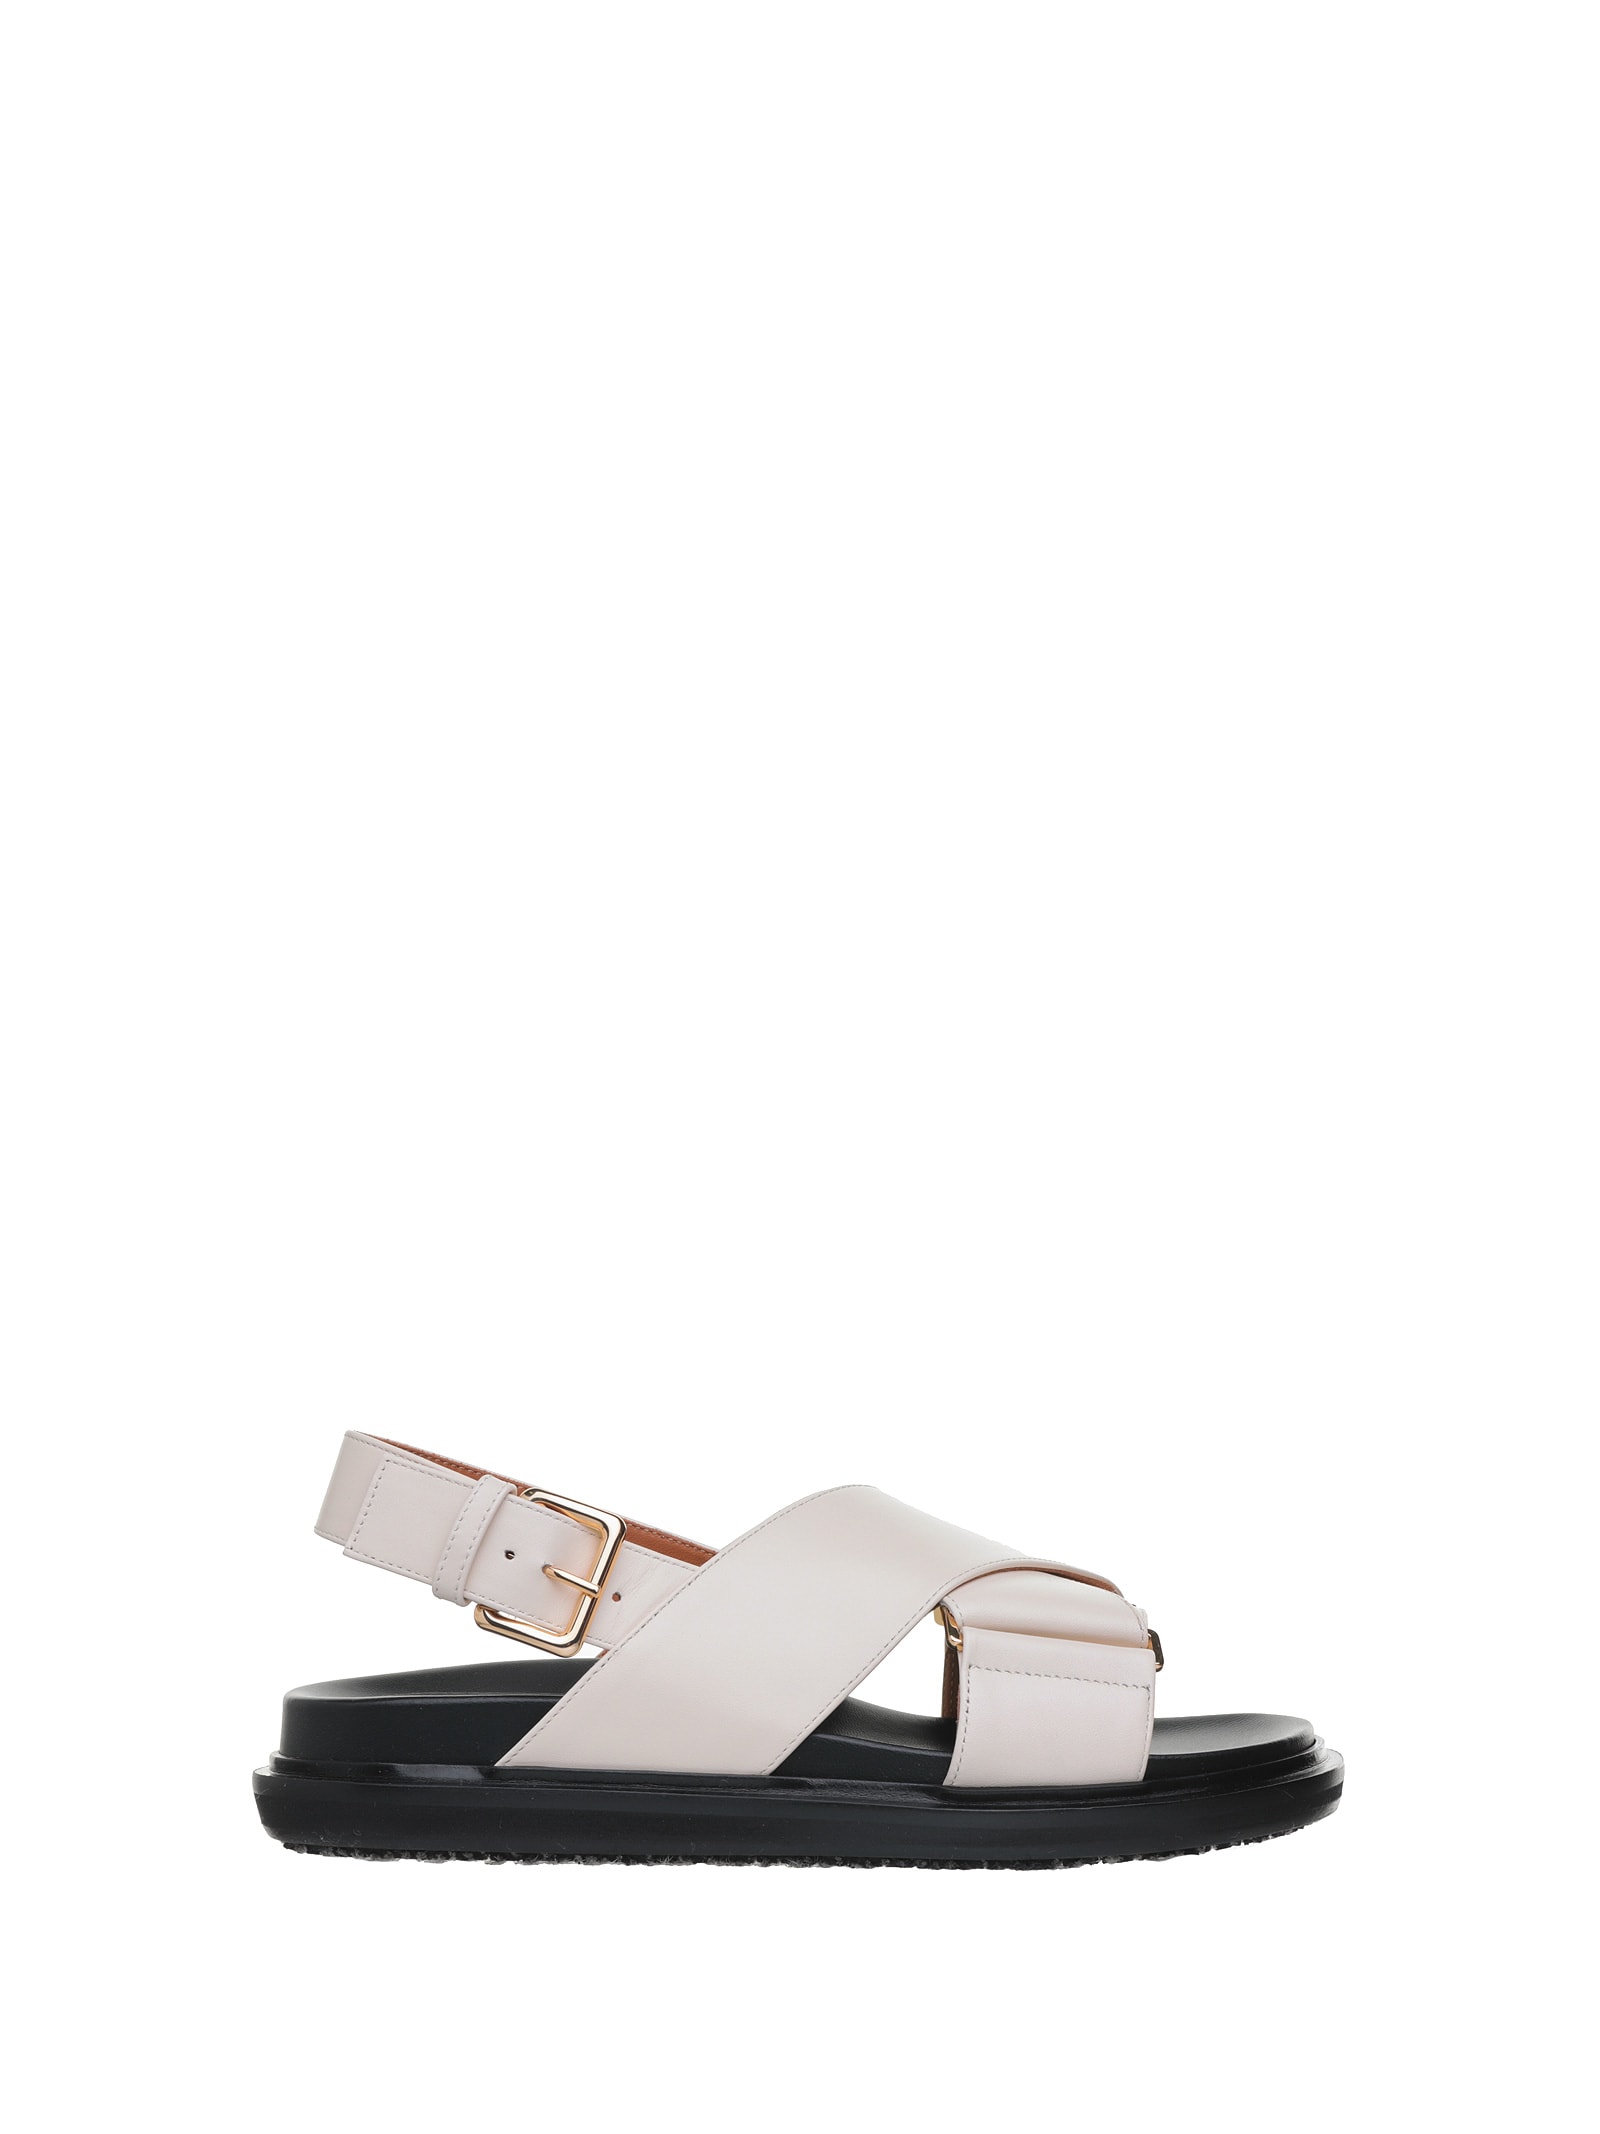 Marni Marni Fussbett Sandals With Crossed Bands